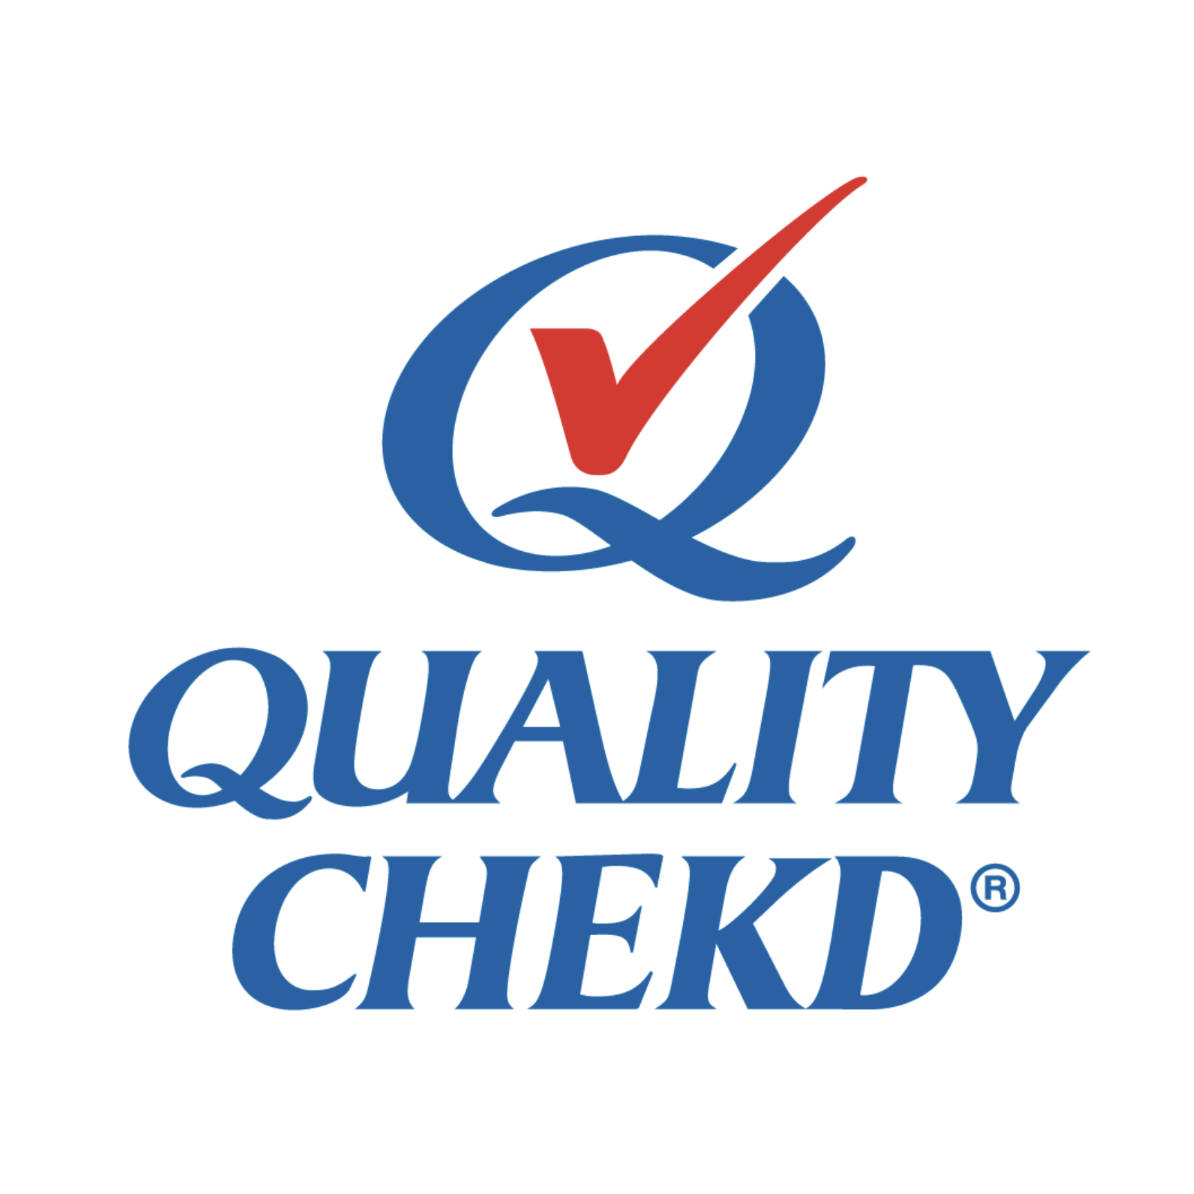 Quality Checked